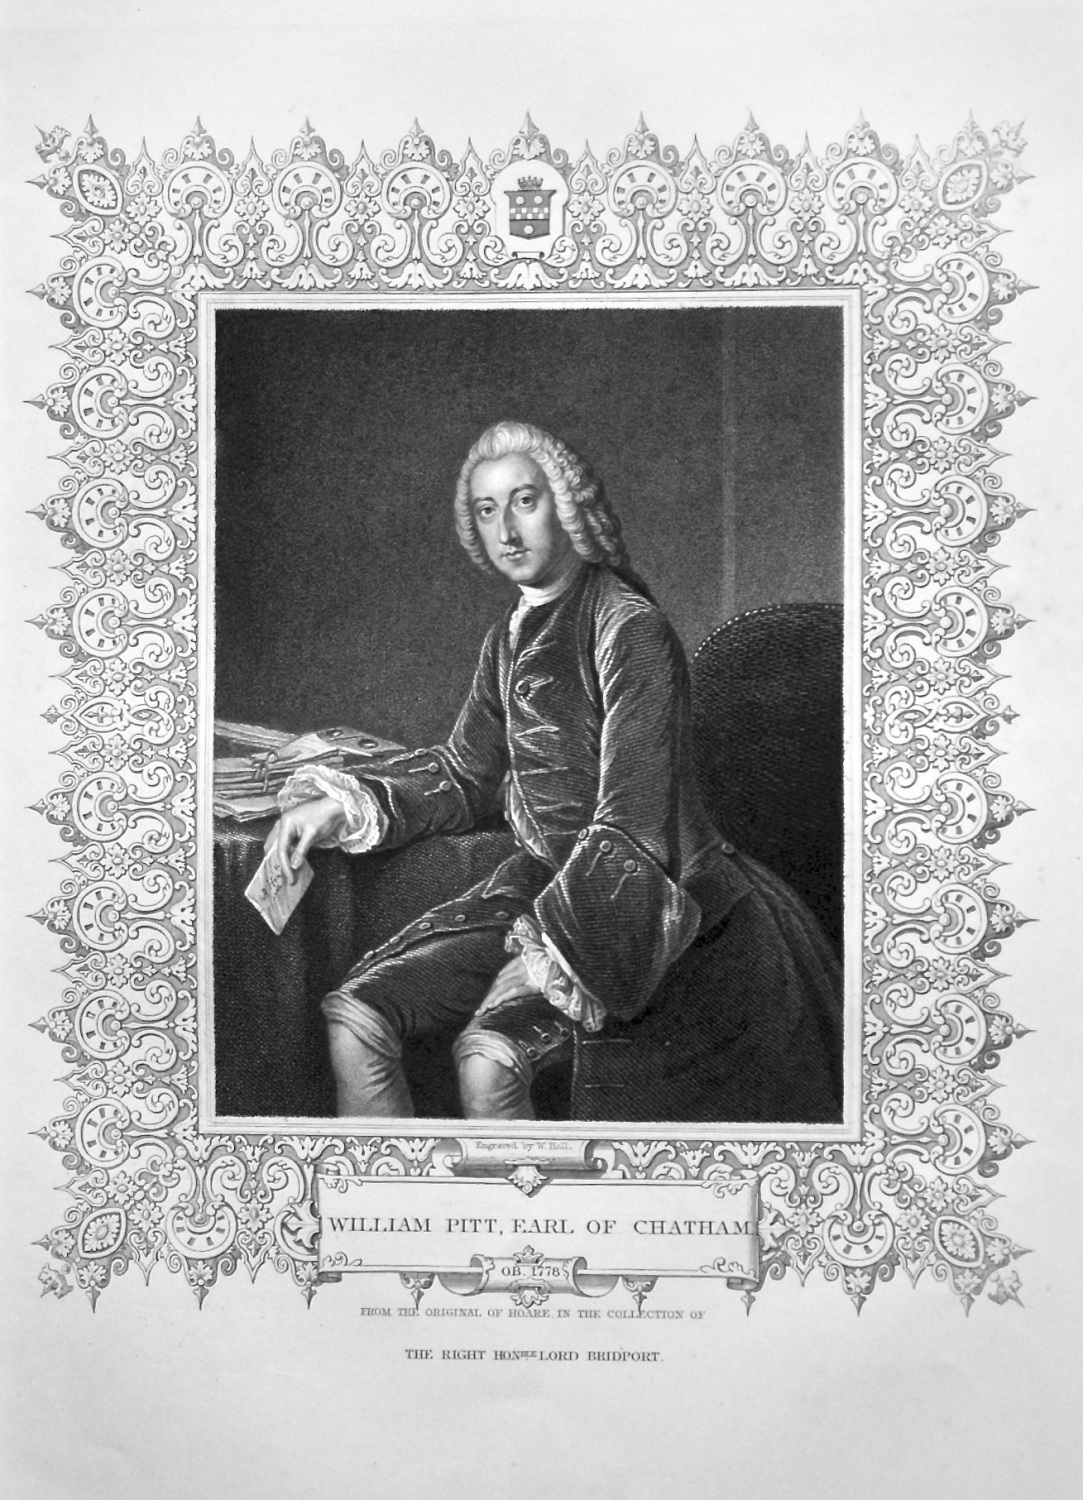 William Pitt, Earl of Chatham. OB. 1778.  From the original of Hoare, in th